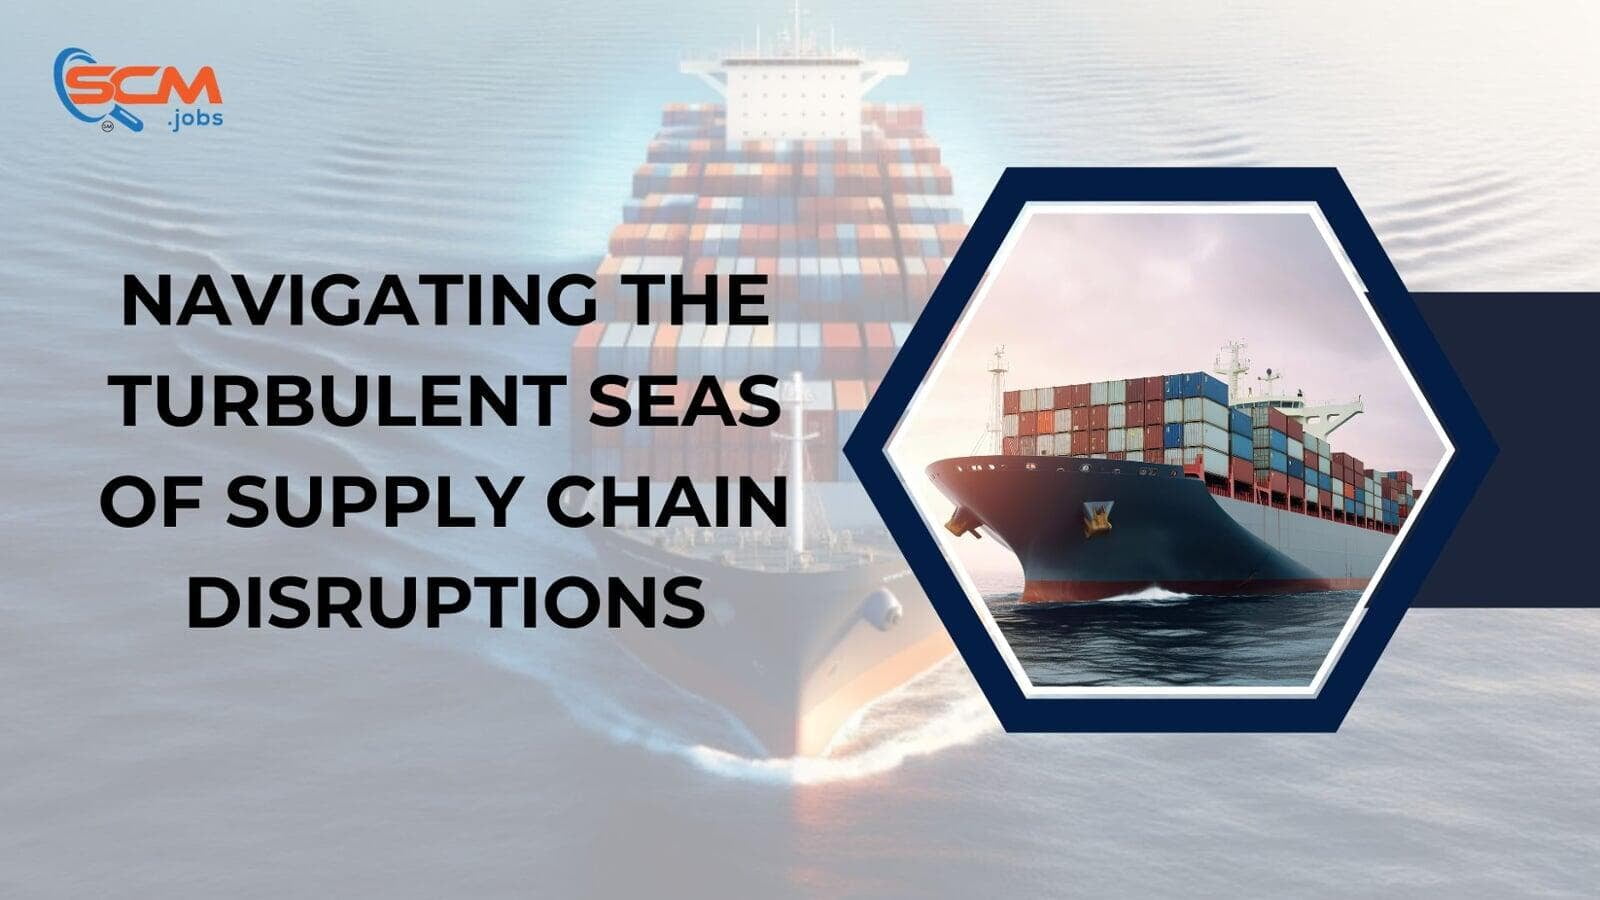 Navigating the Turbulent Seas of Supply Chain Disruptions